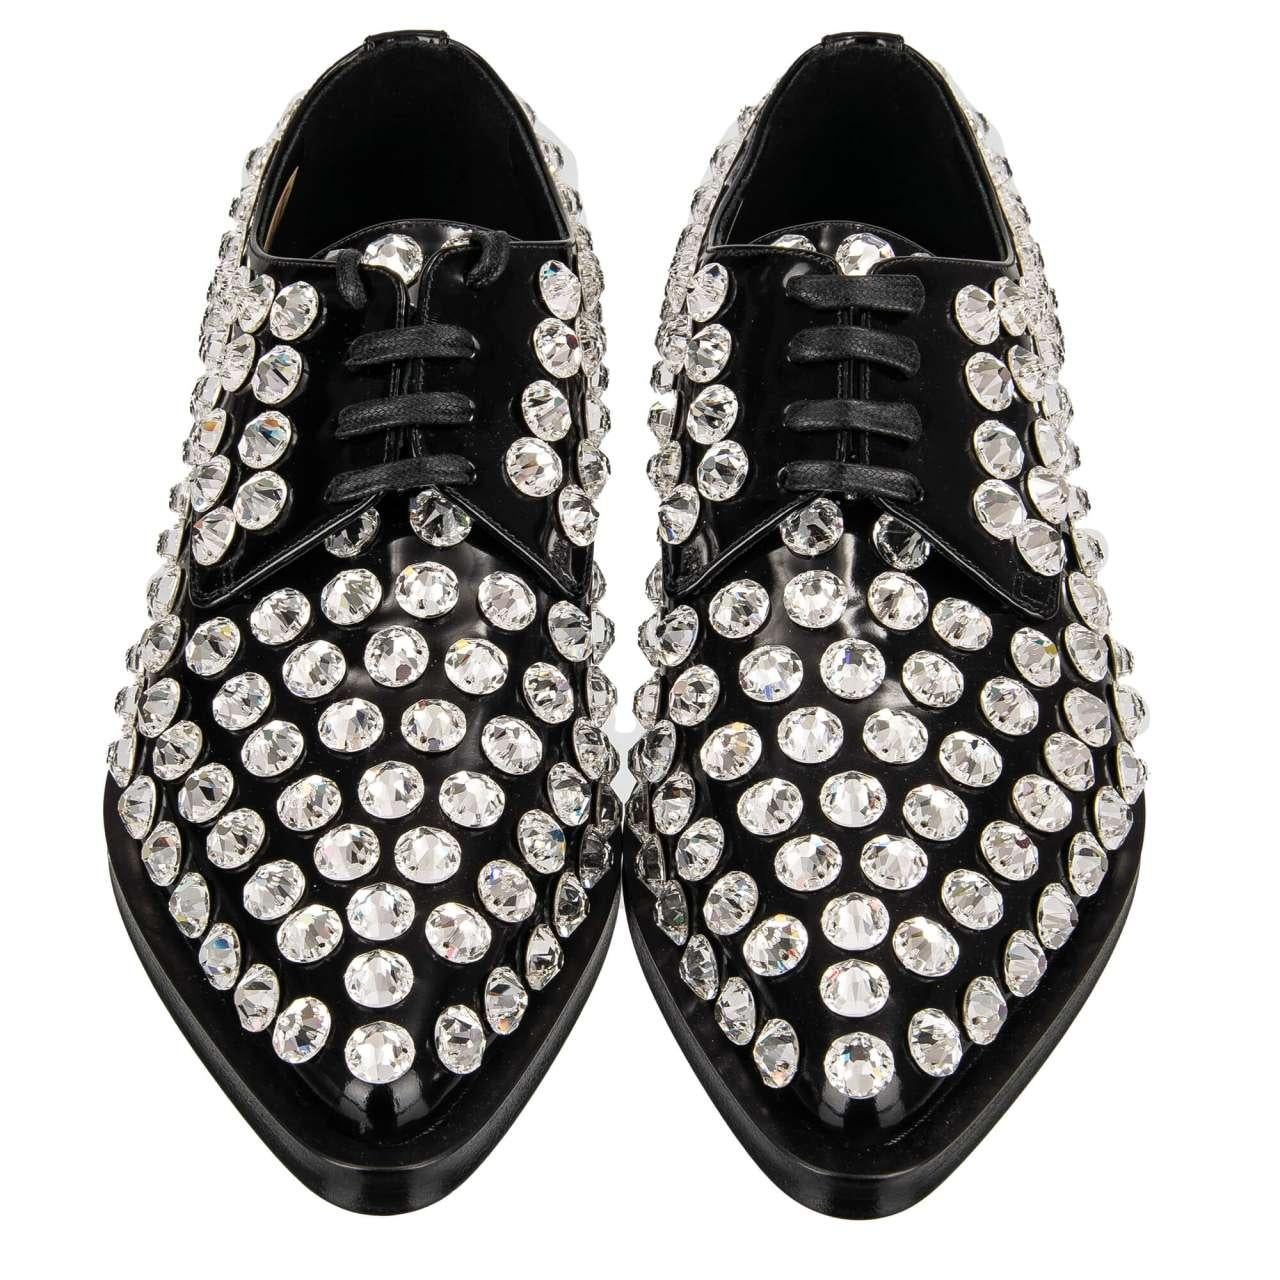 - Classic women leather shoes MILLENIALS with pointy toe shape and crystals embroidery in black and white by DOLCE & GABBANA - MADE IN ITALY - New with Box - Model: CN0088-AO097-8S488 - Material: 100% Calf fur - Sole: Leather - Color: Black / White